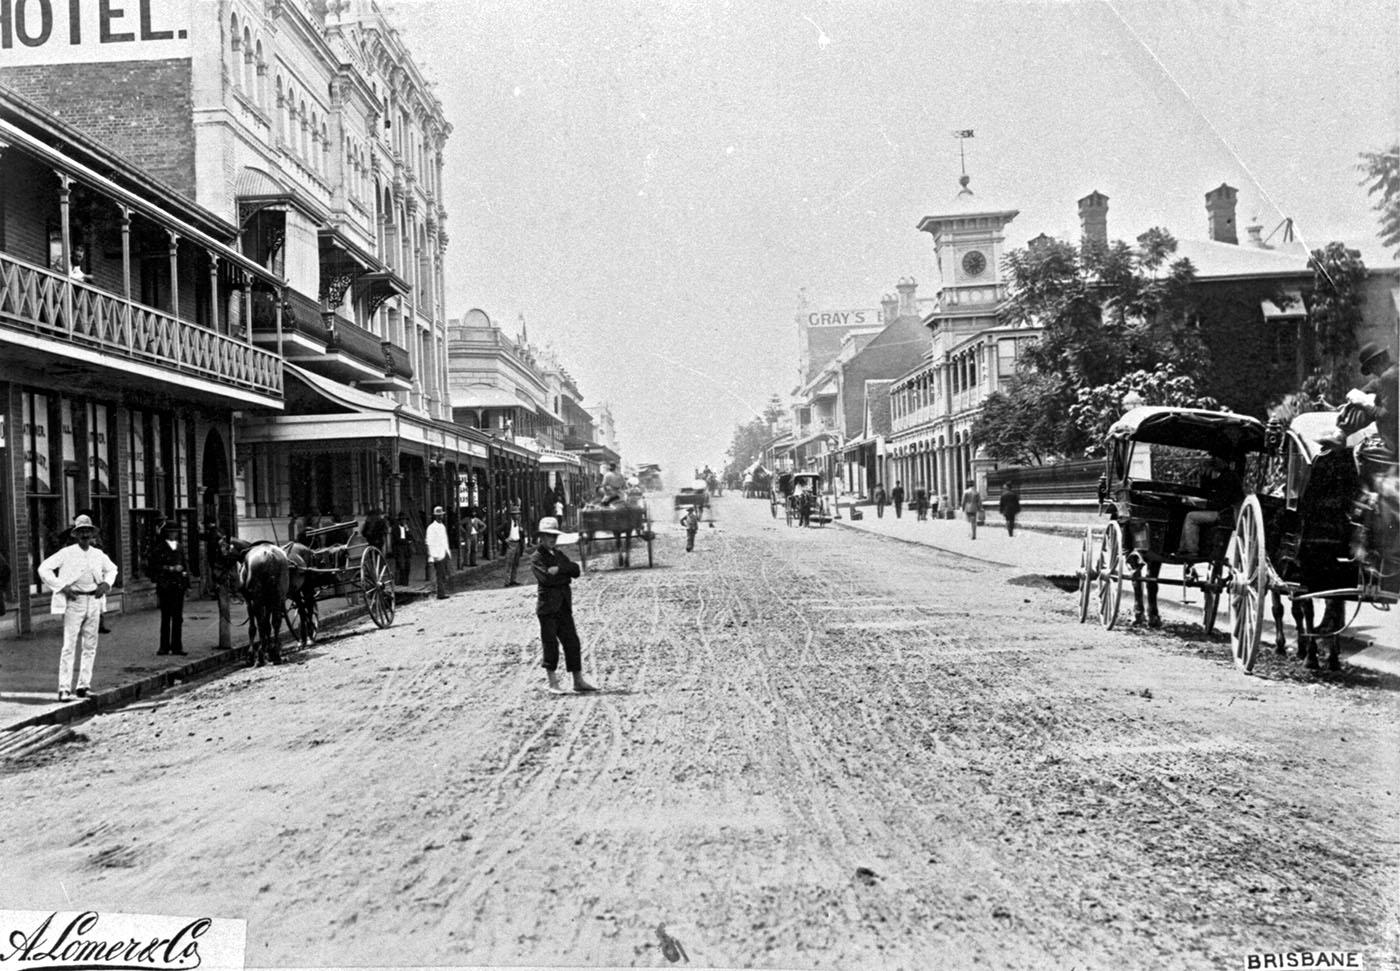 George Street with horse-drawn carriages and pedestrians.